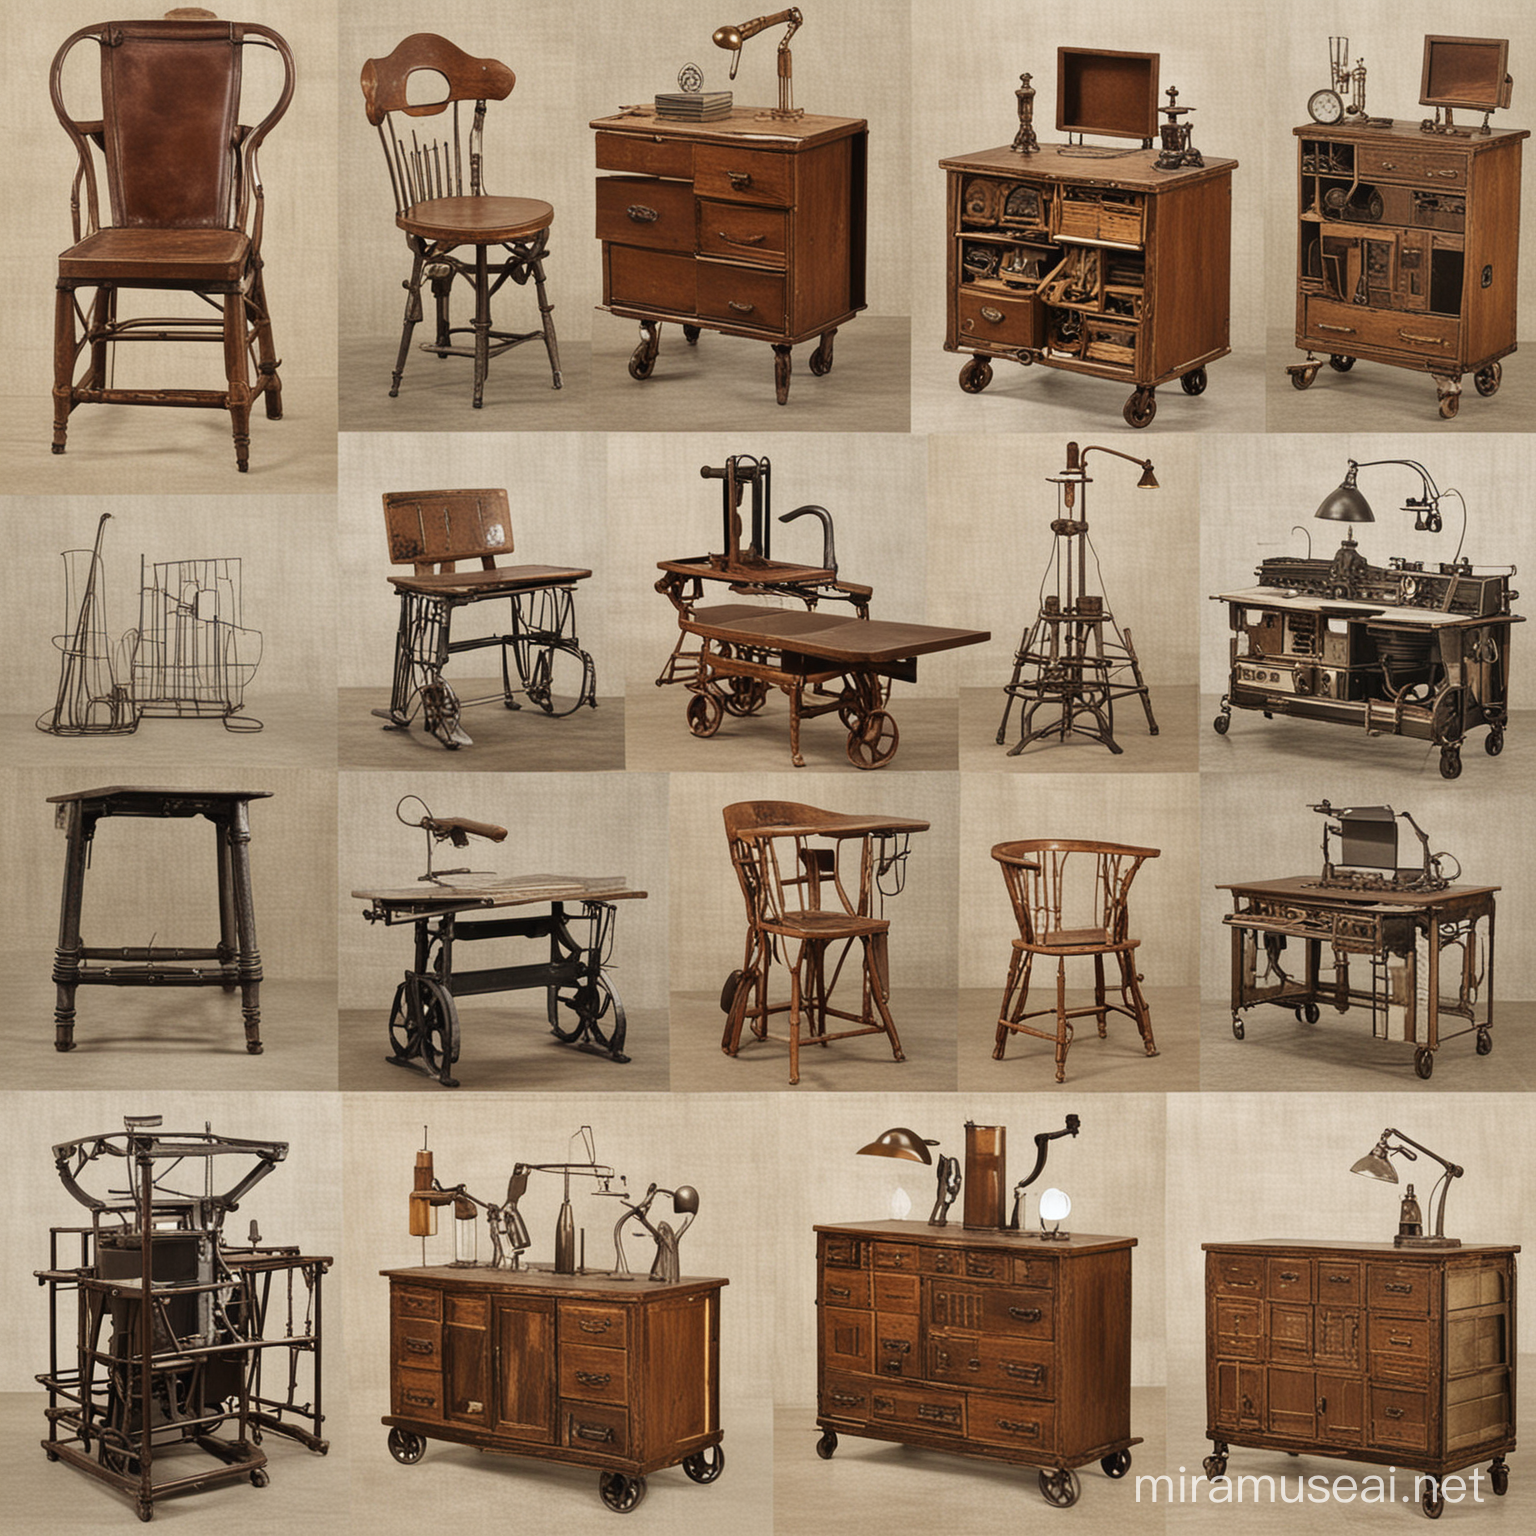 Industrial Furniture A Visual Journey Through Time and Revolution